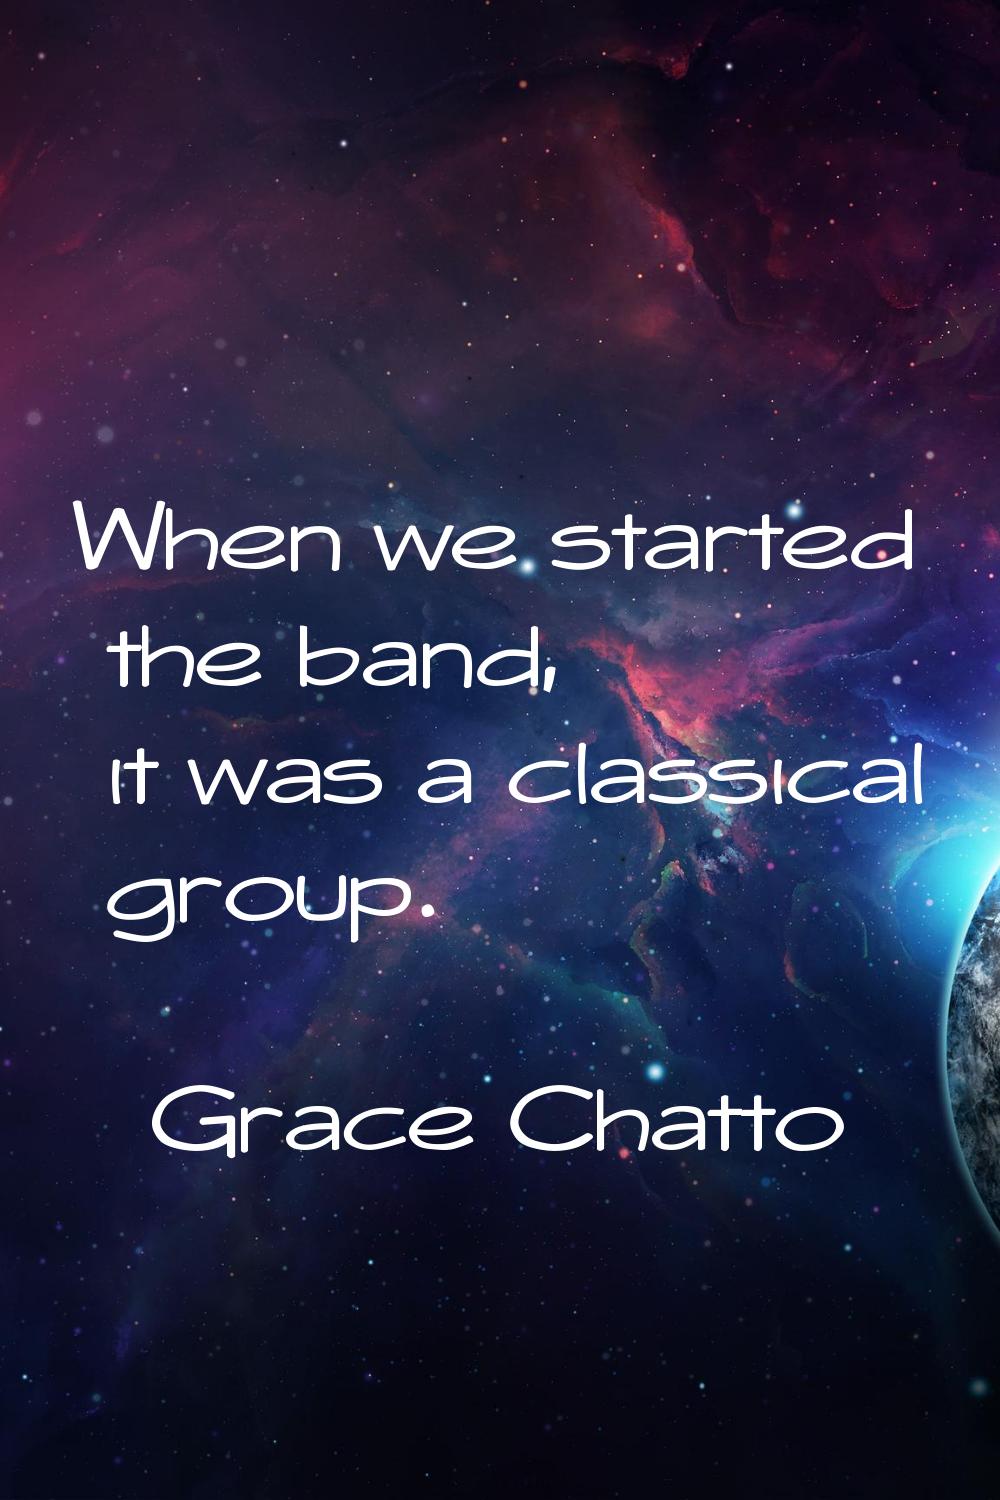 When we started the band, it was a classical group.